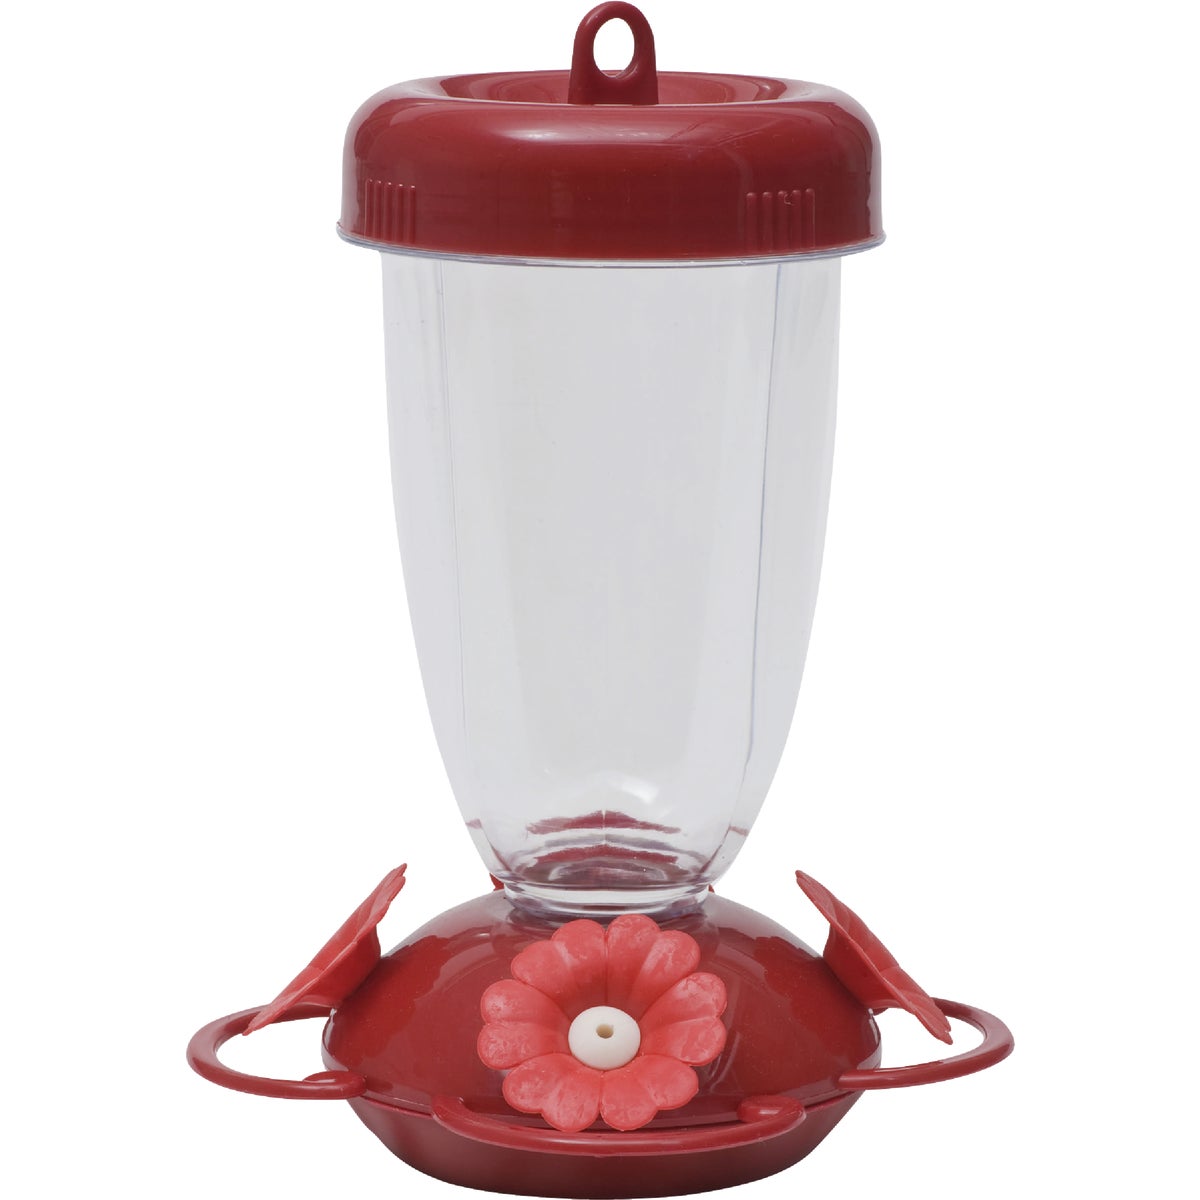 Item 760409, Features high-capacity clear glass bottle with a 30 Oz. nectar capacity.